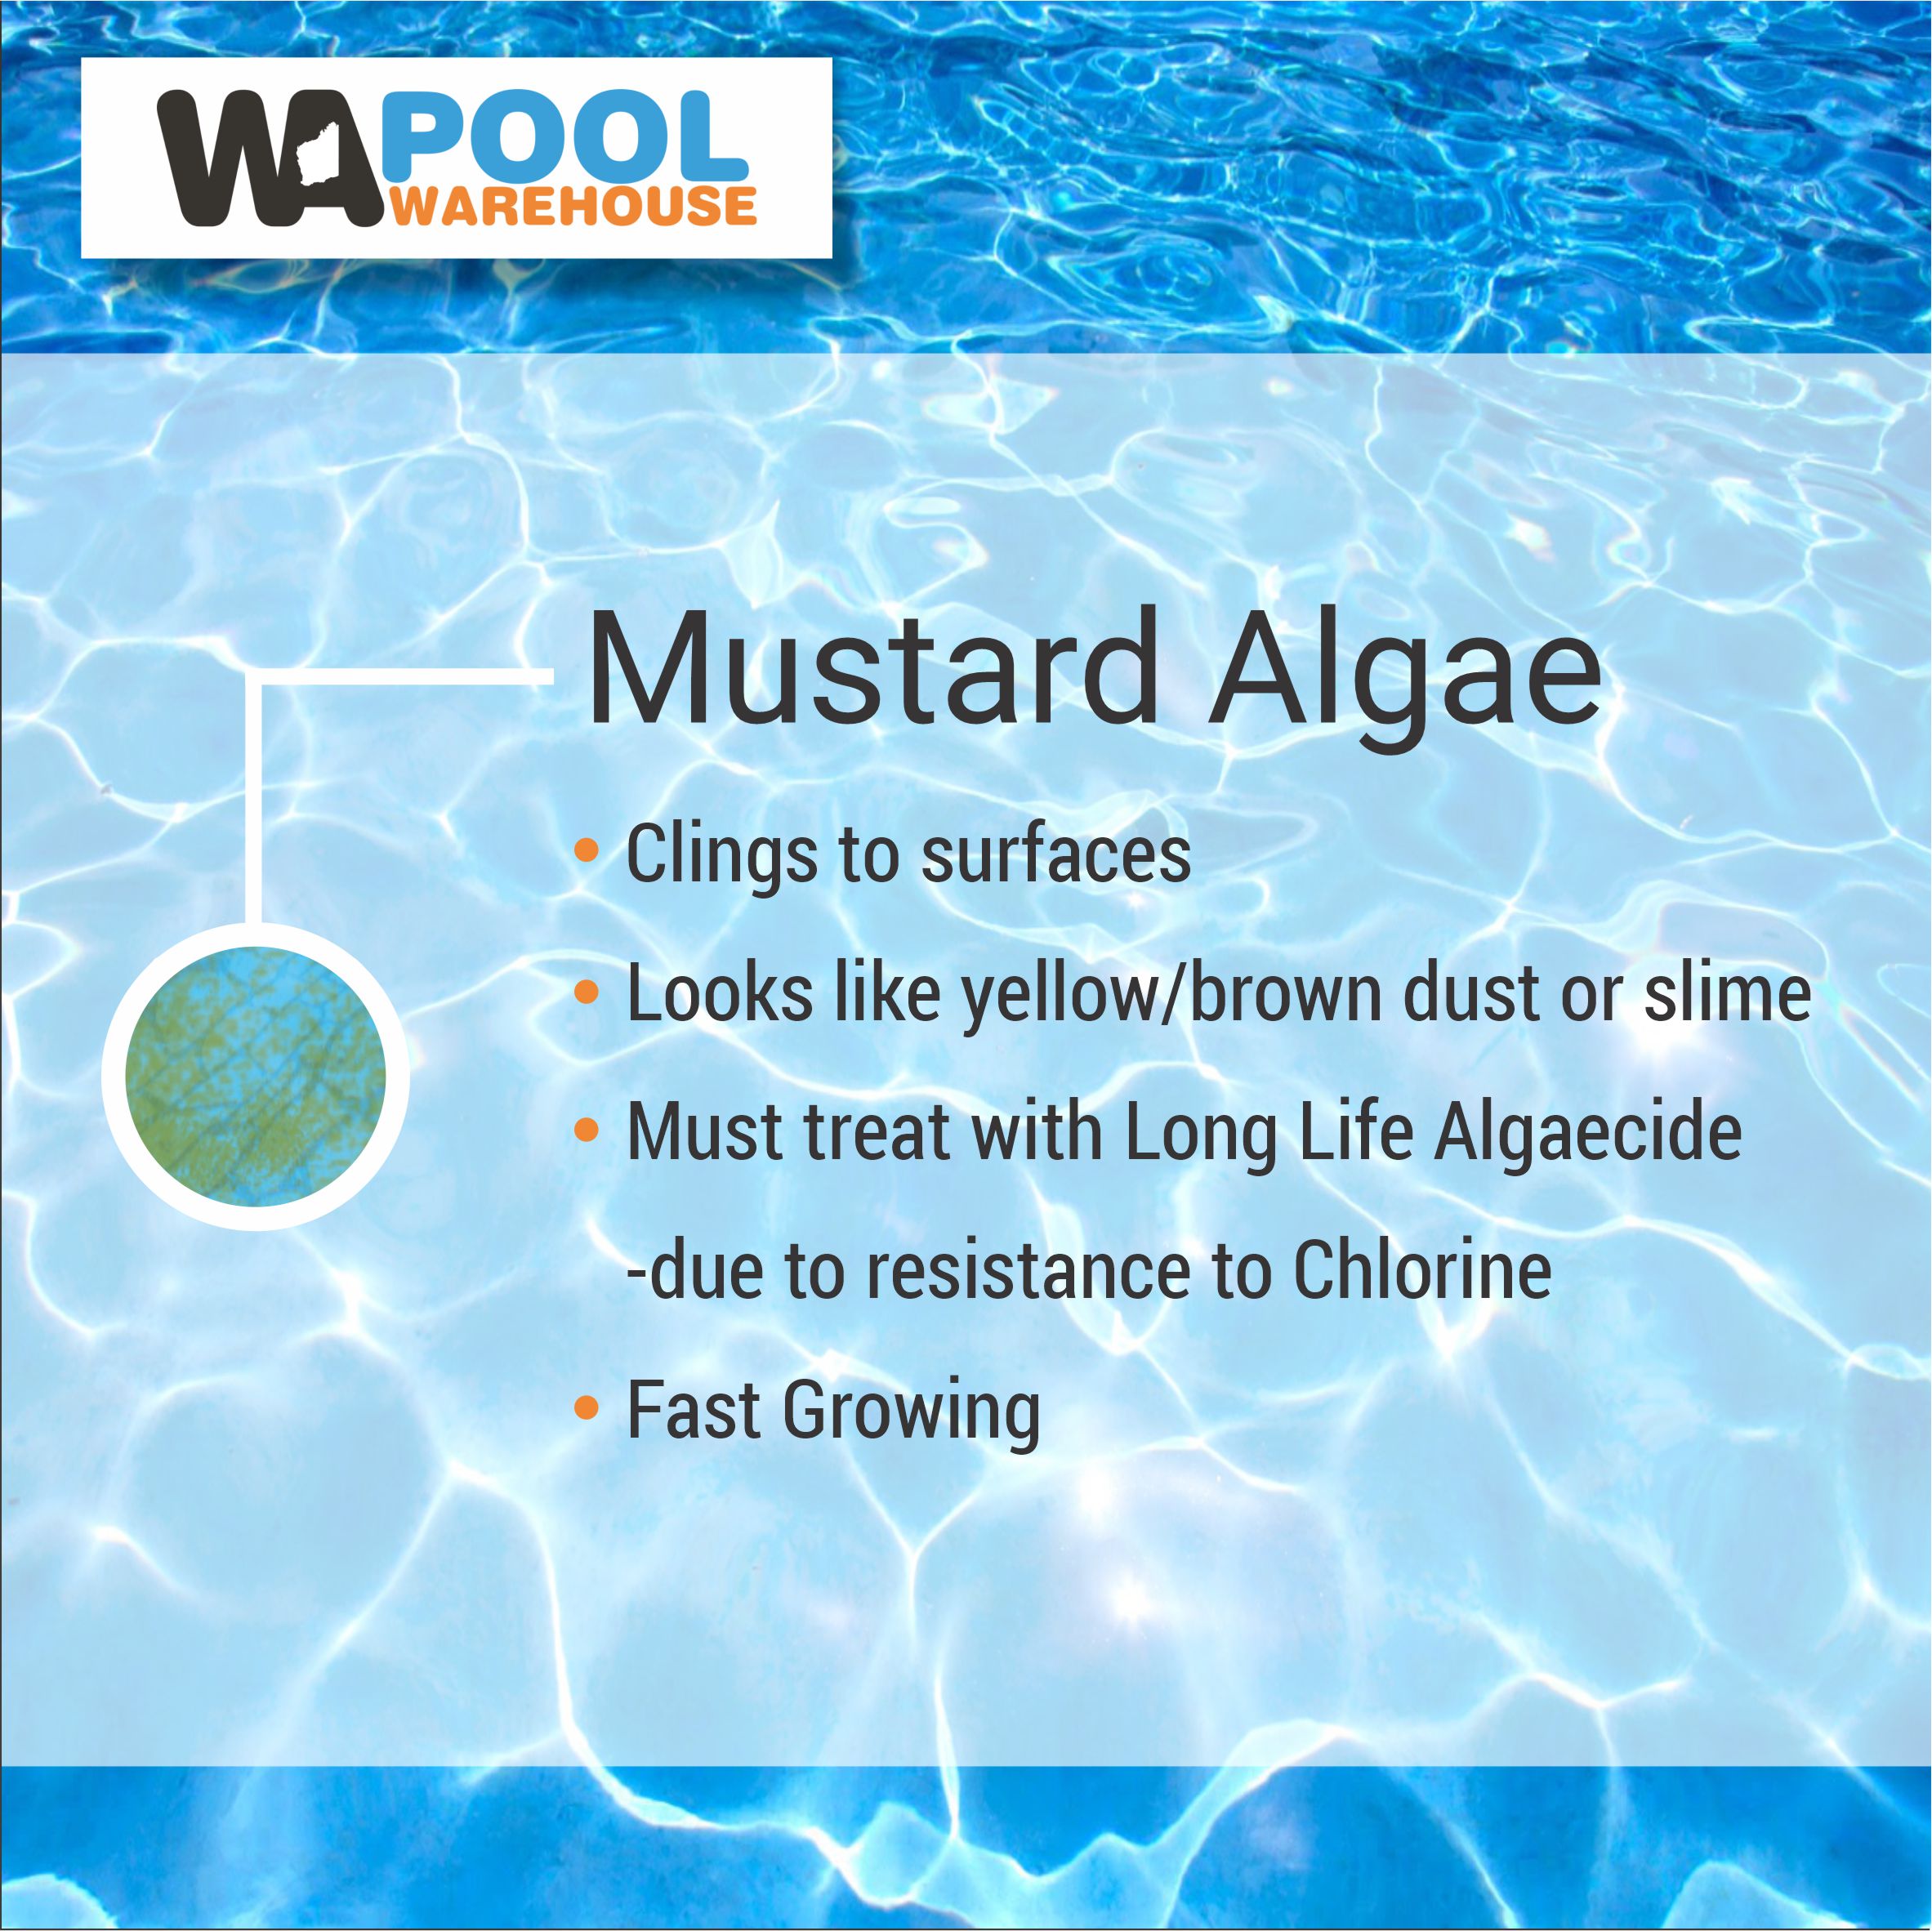 What is Mustard Algae and how do I fix it?